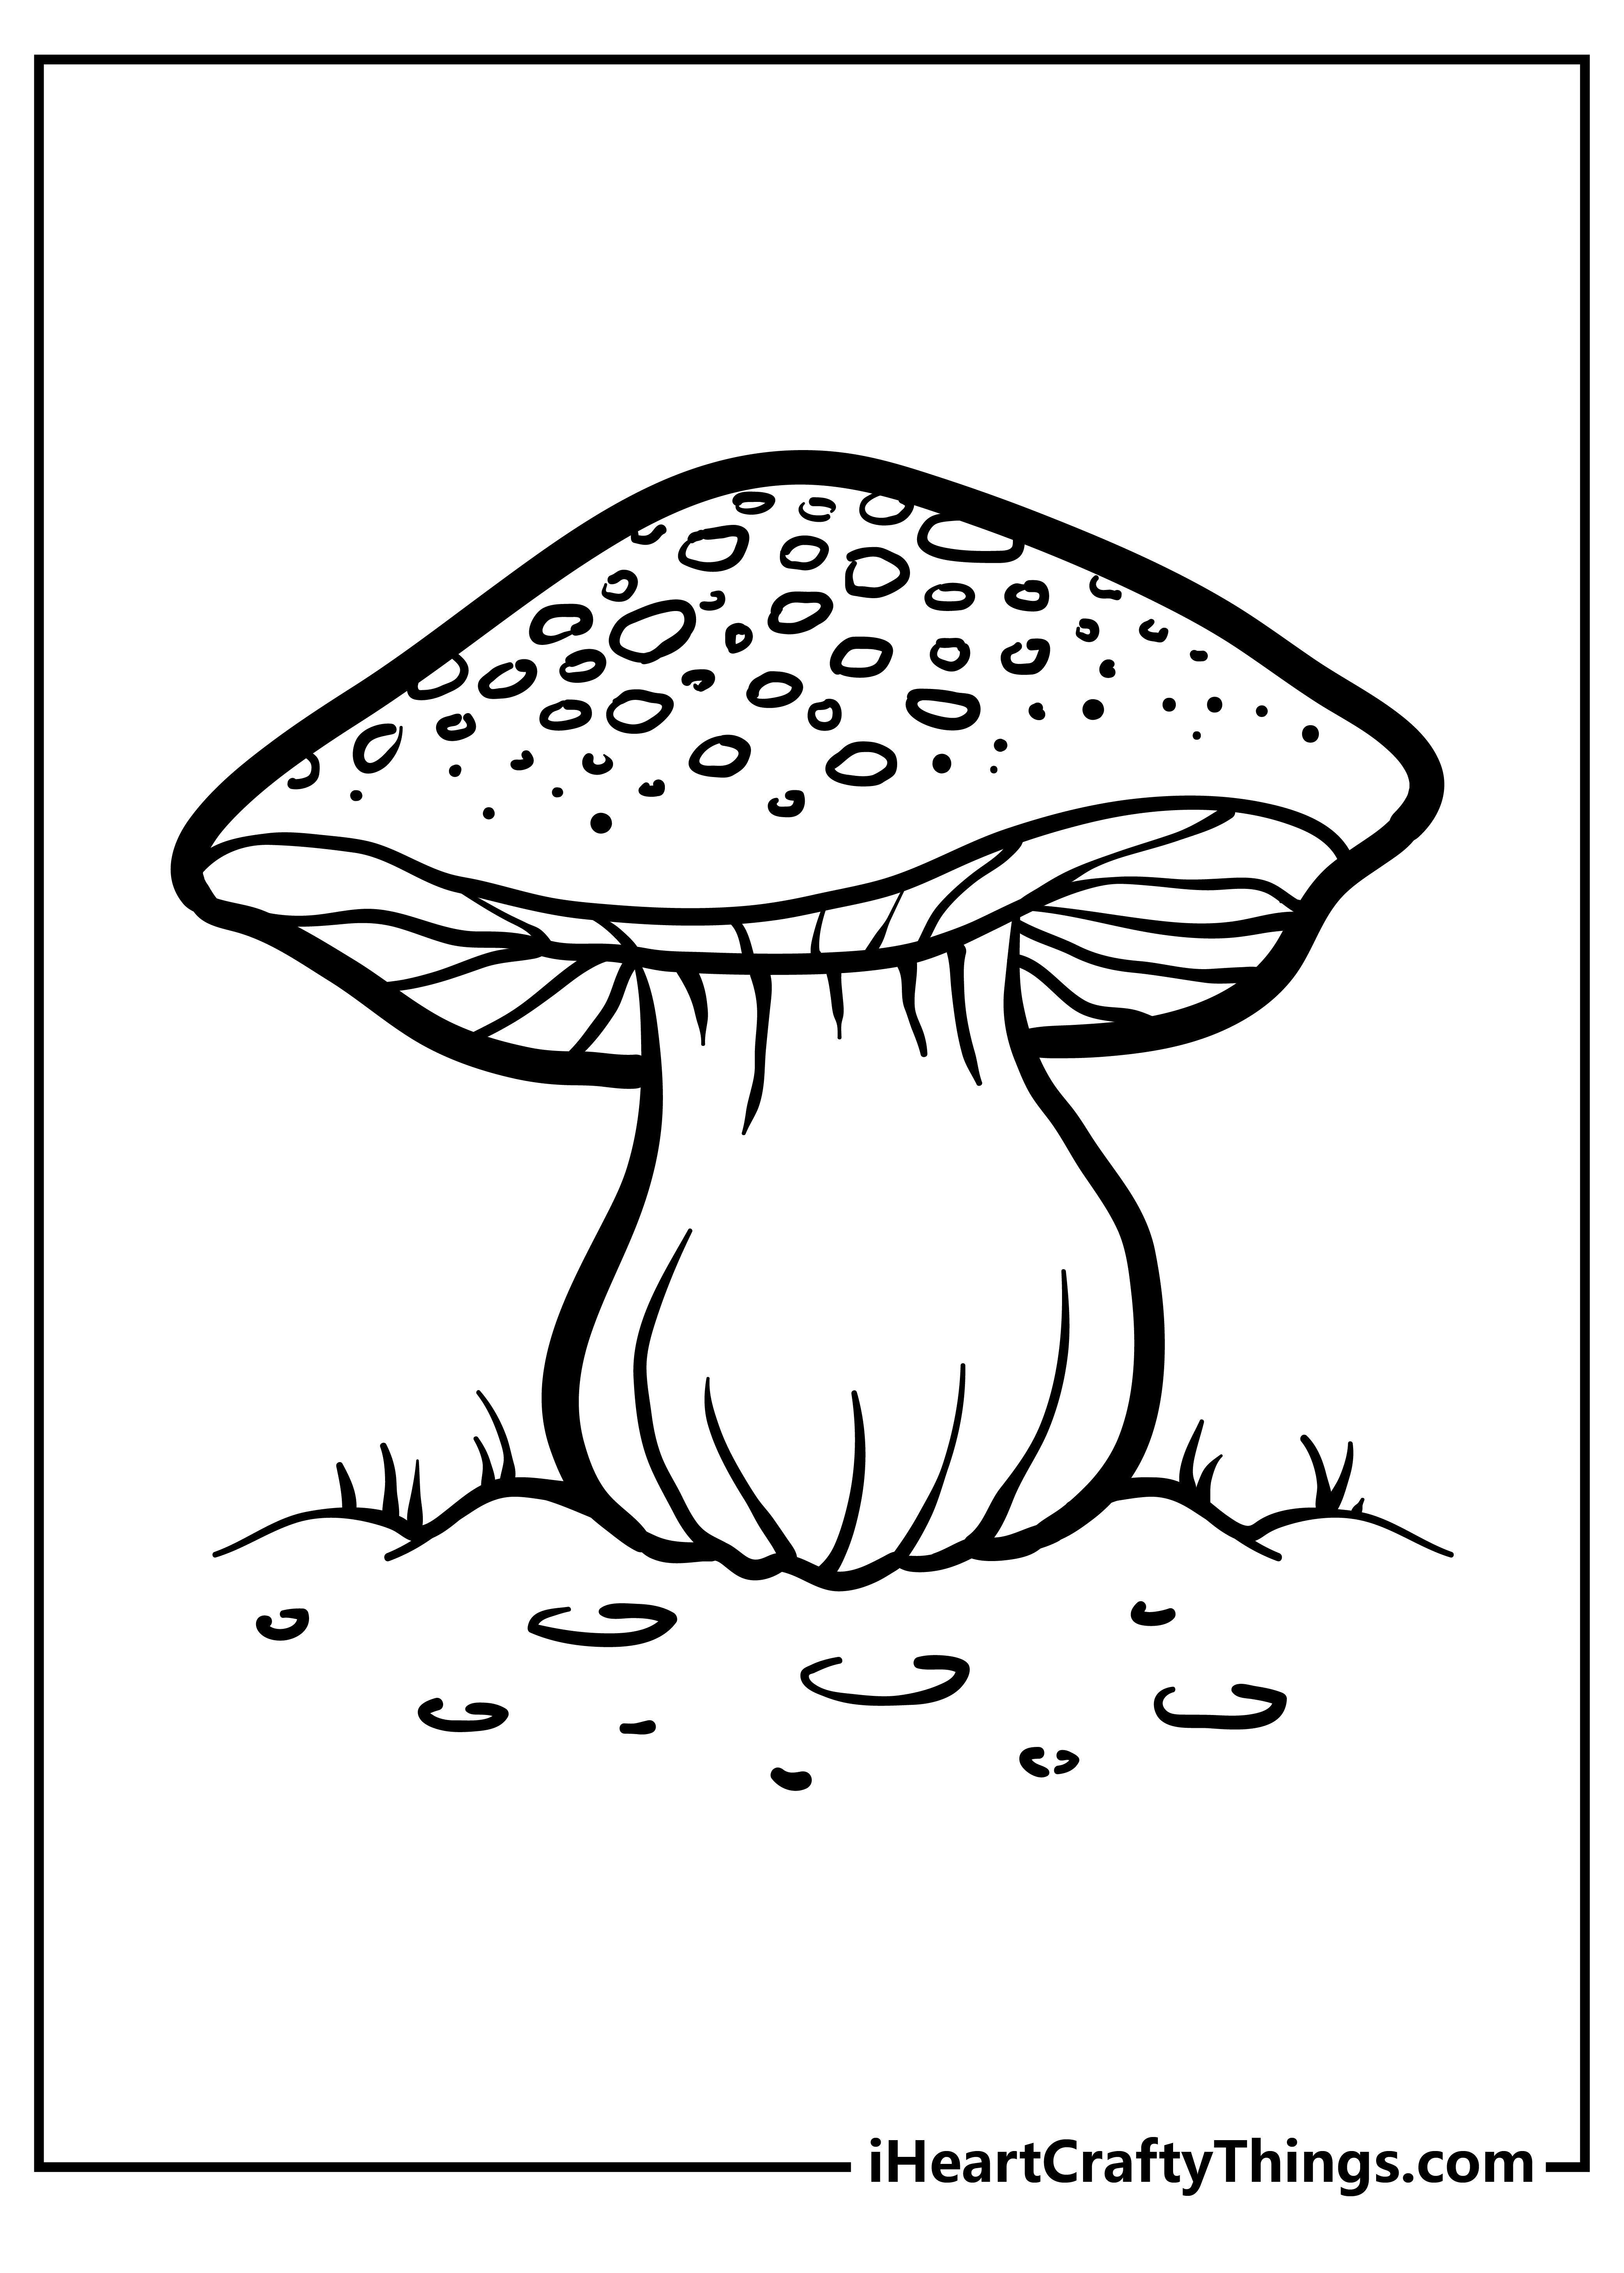 Mushroom Easy Coloring Pages